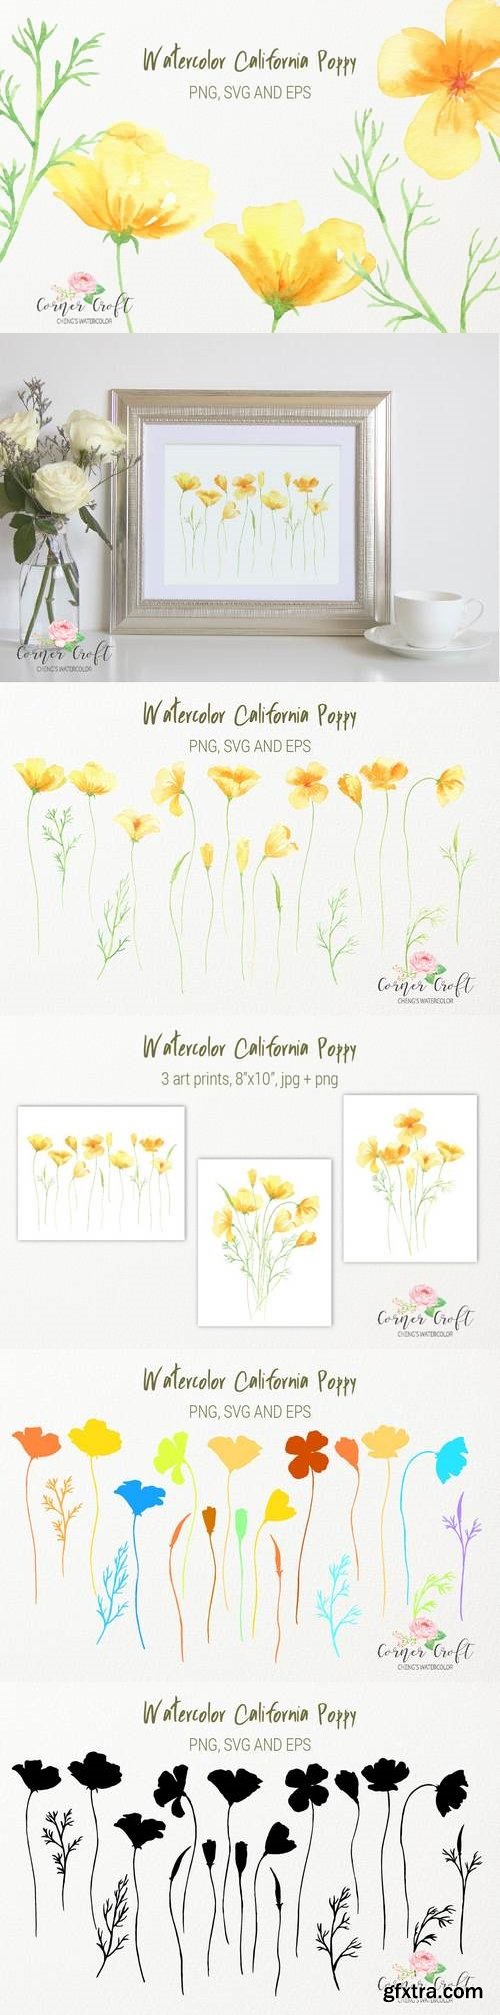 Watercolor California poppy, silhouette, png, svg